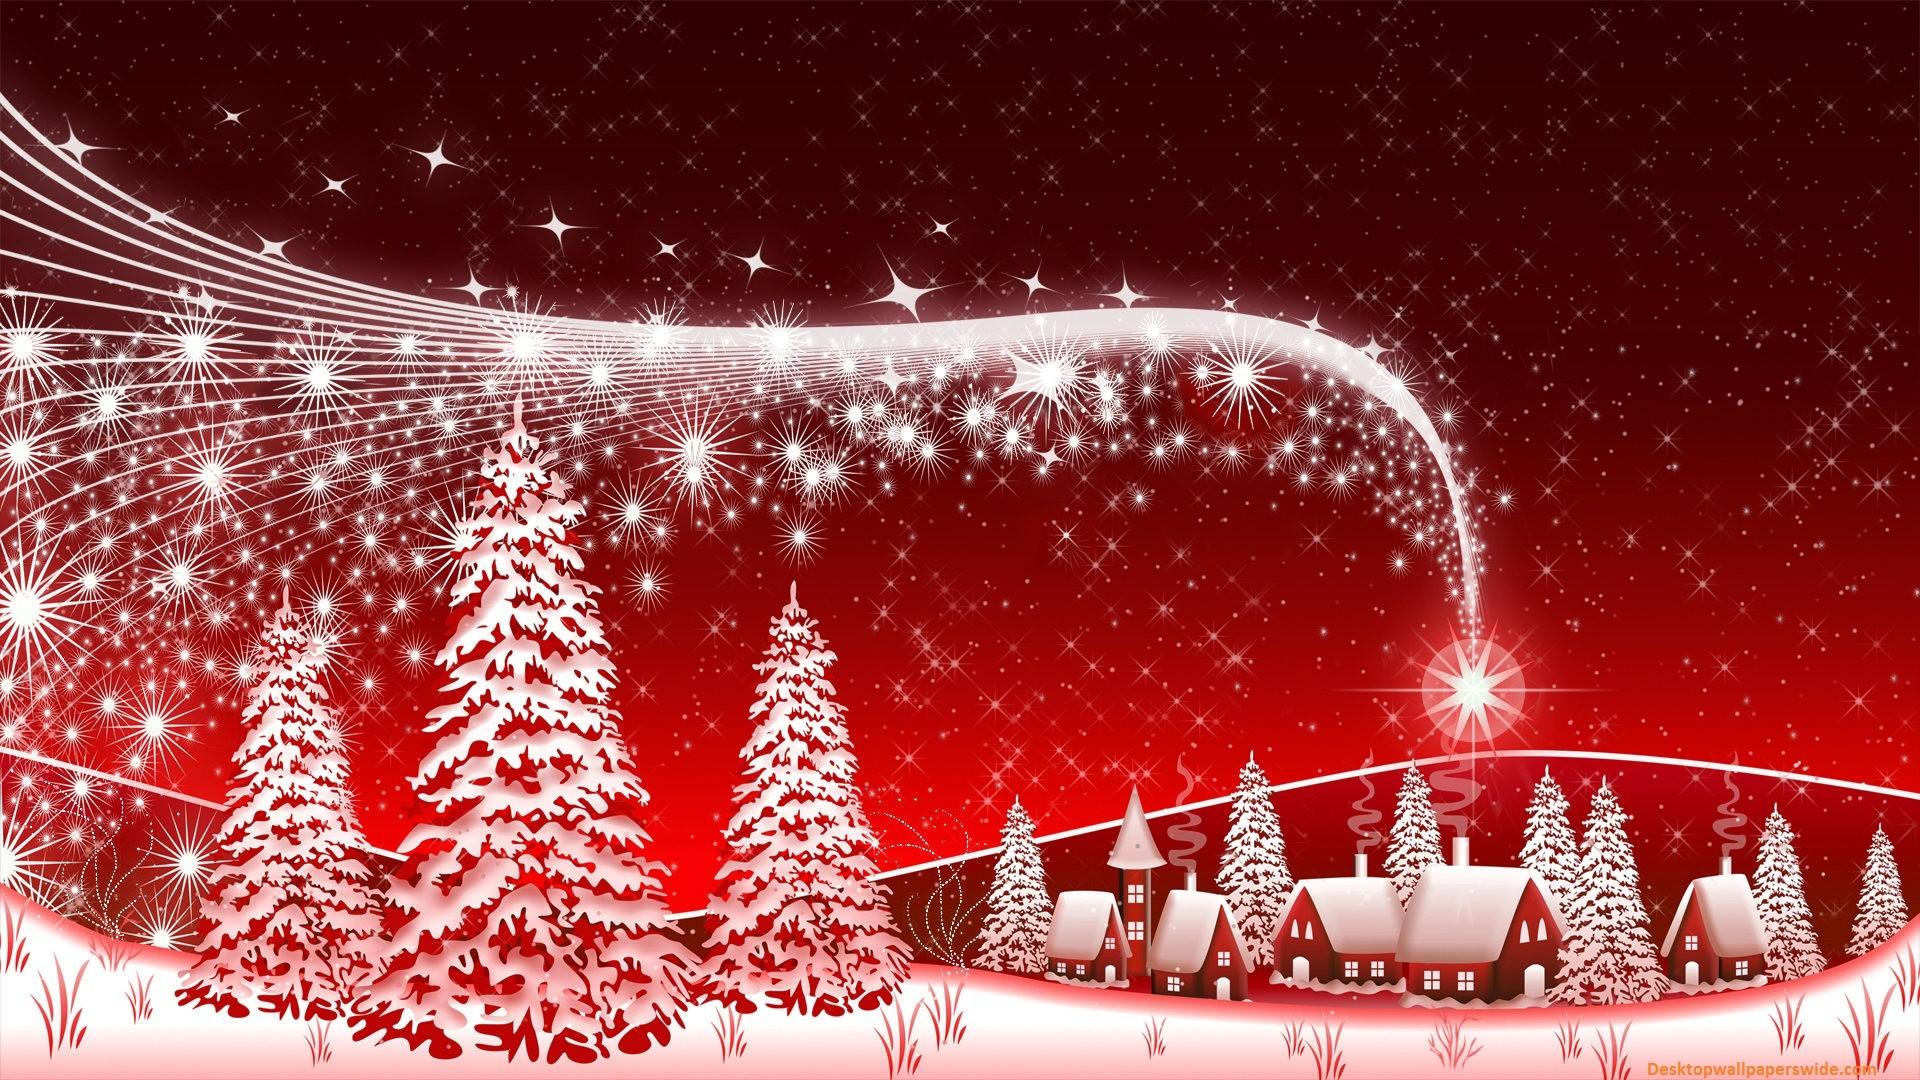 Animated Gifs Christmas wallpapers for kids funny collection download